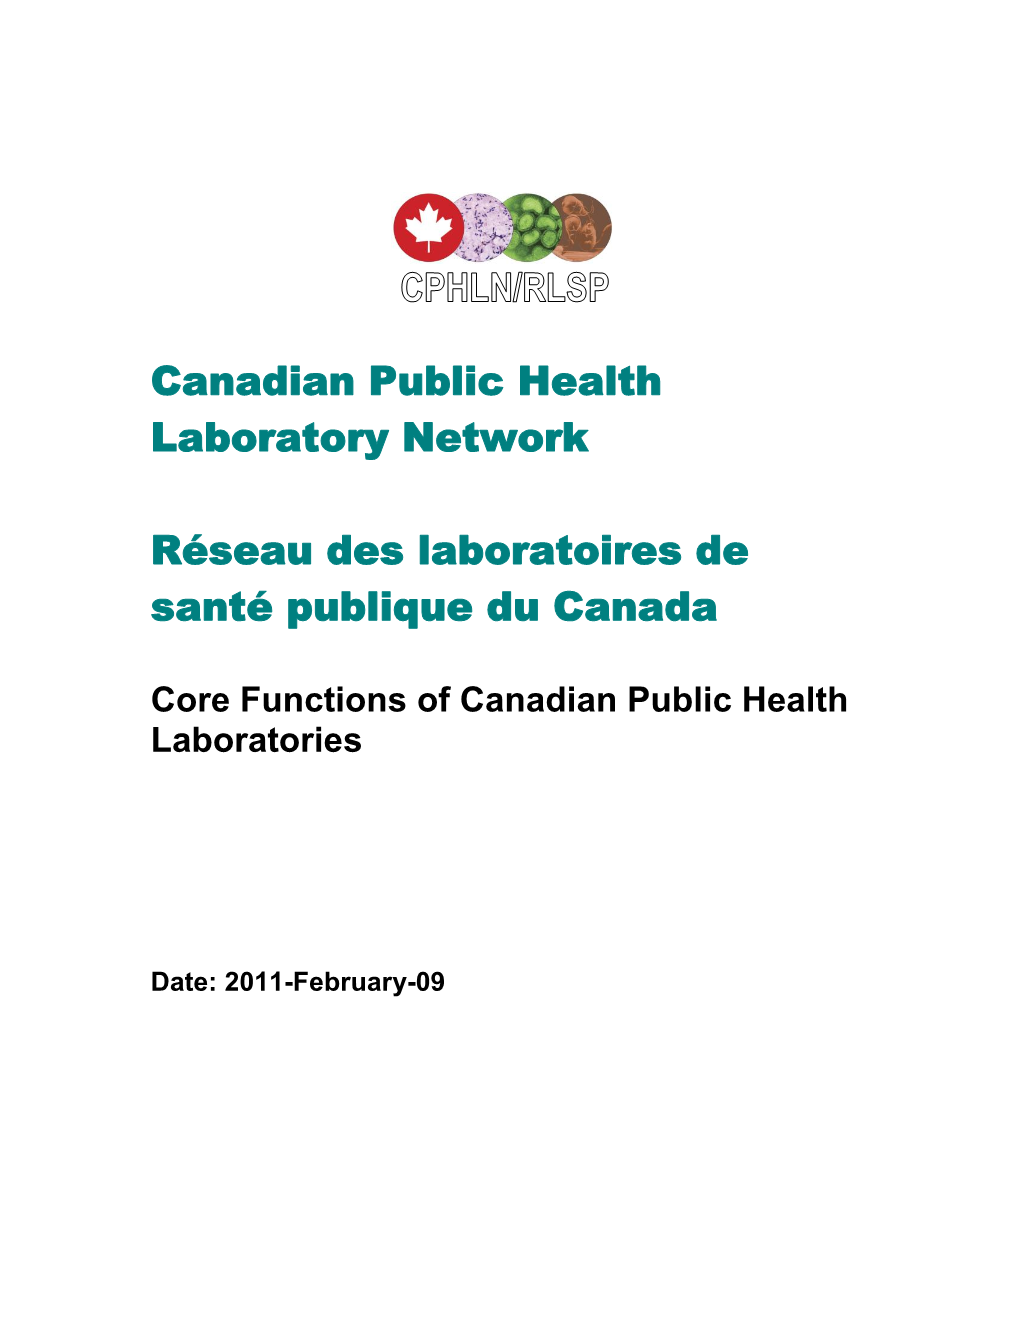 Core Functions of Canadian Public Health Laboratories